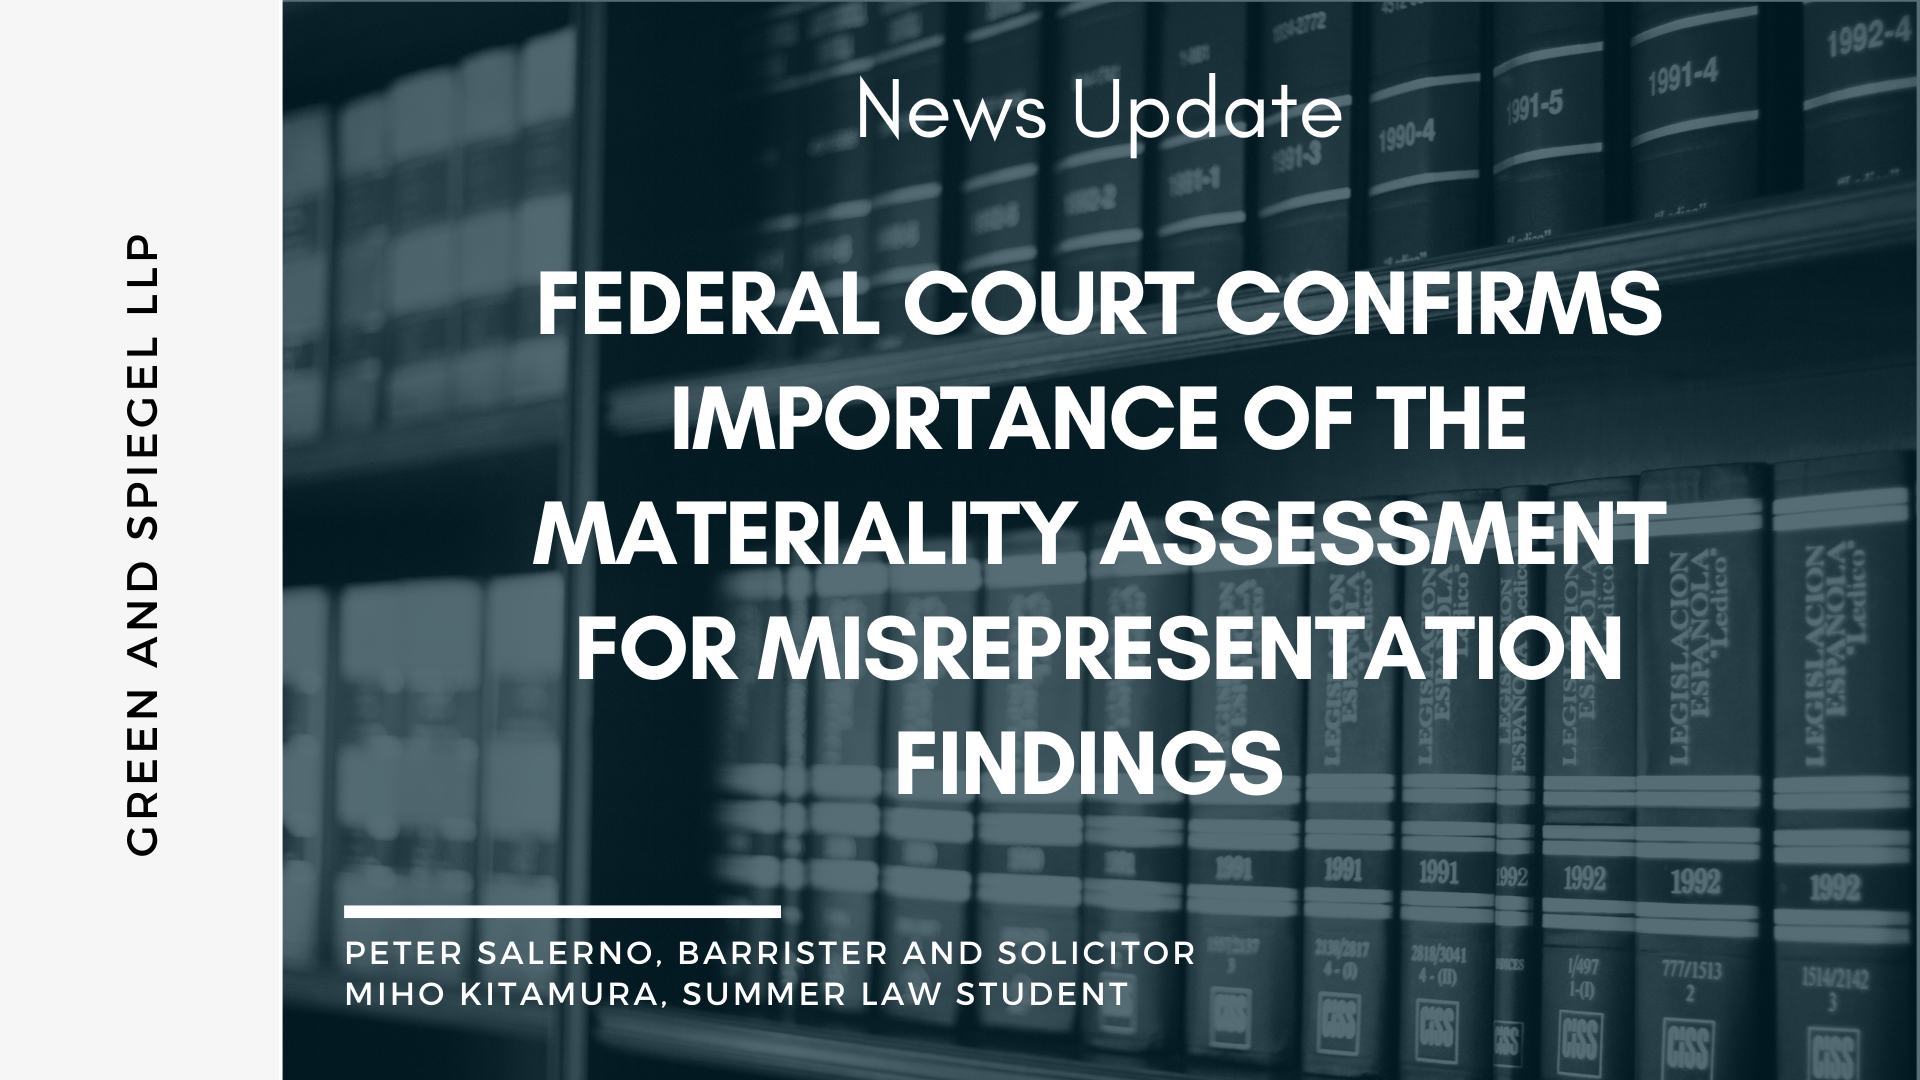 FEDERAL COURT CONFIRMS IMPORTANCE OF THE MATERIALITY ASSESSMENT FOR MISREPRESENTATION FINDINGS